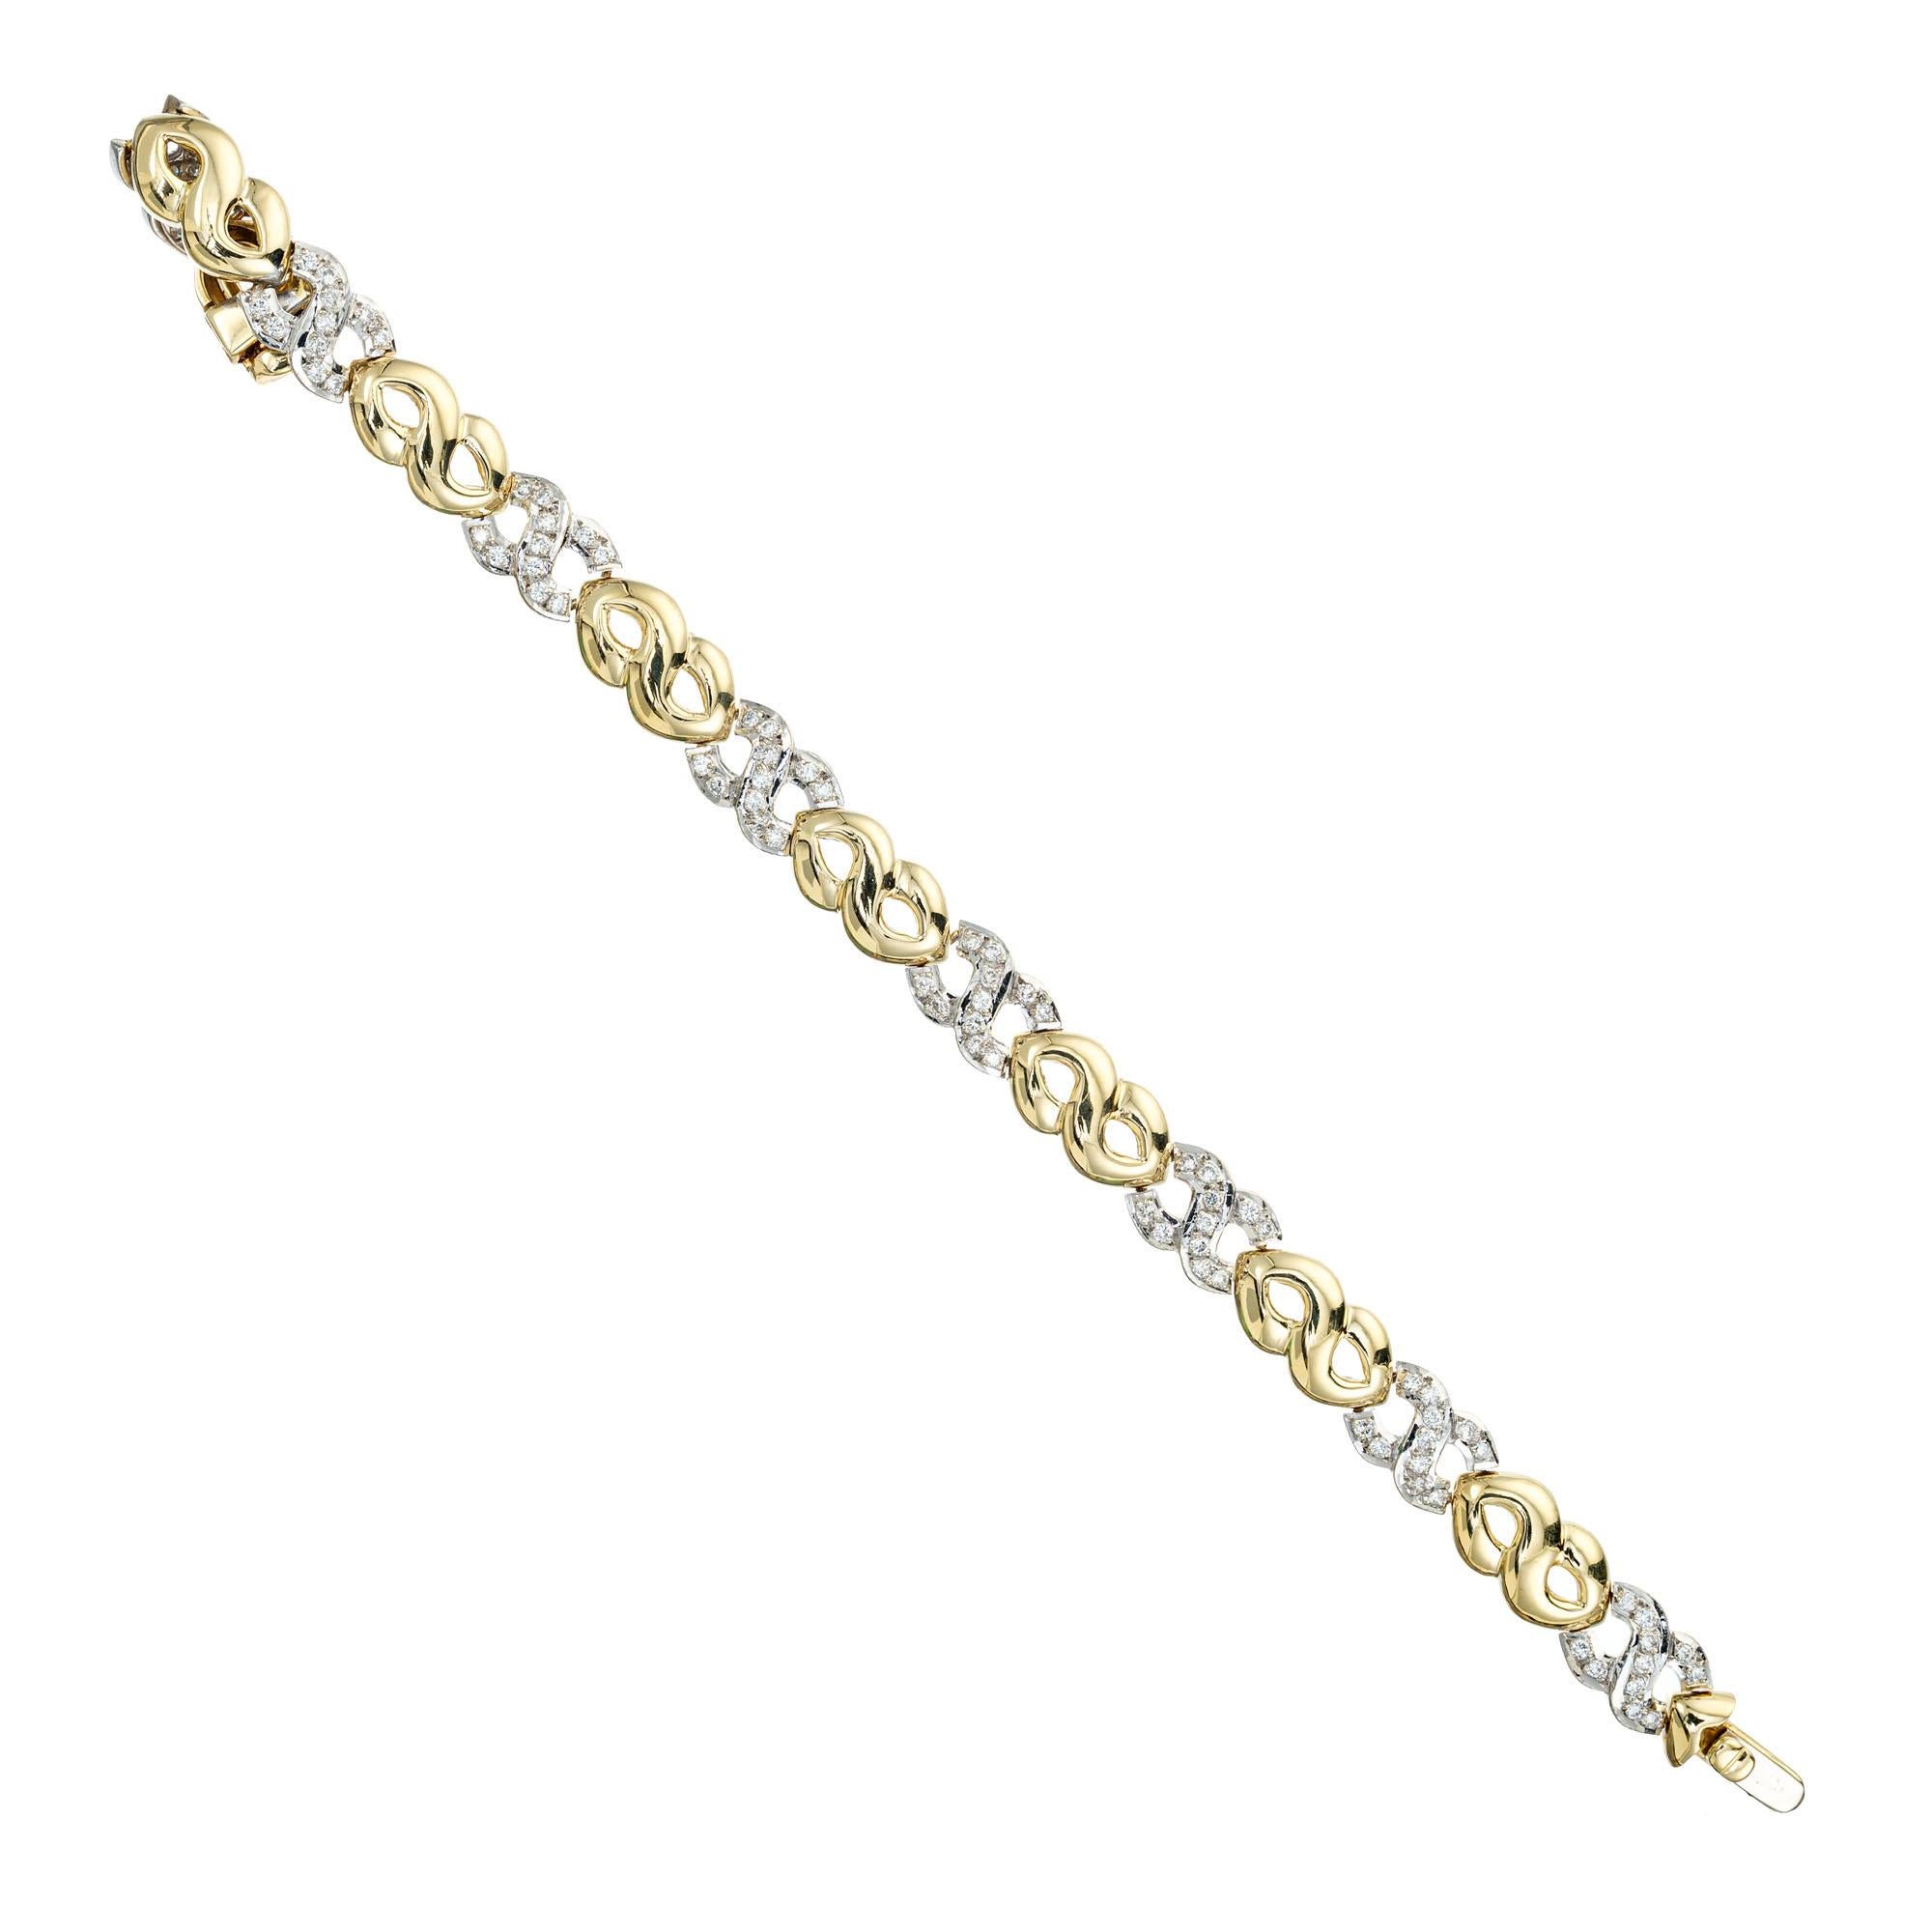 Pave diamond gold bracelet. 88 round full cut pave set diamonds set in 18k white gold swirl links, connected by 18k yellow swirl links. 7.5 inches in length. Built in hidden catch and underside safety.

88 round full cut diamonds approx. total